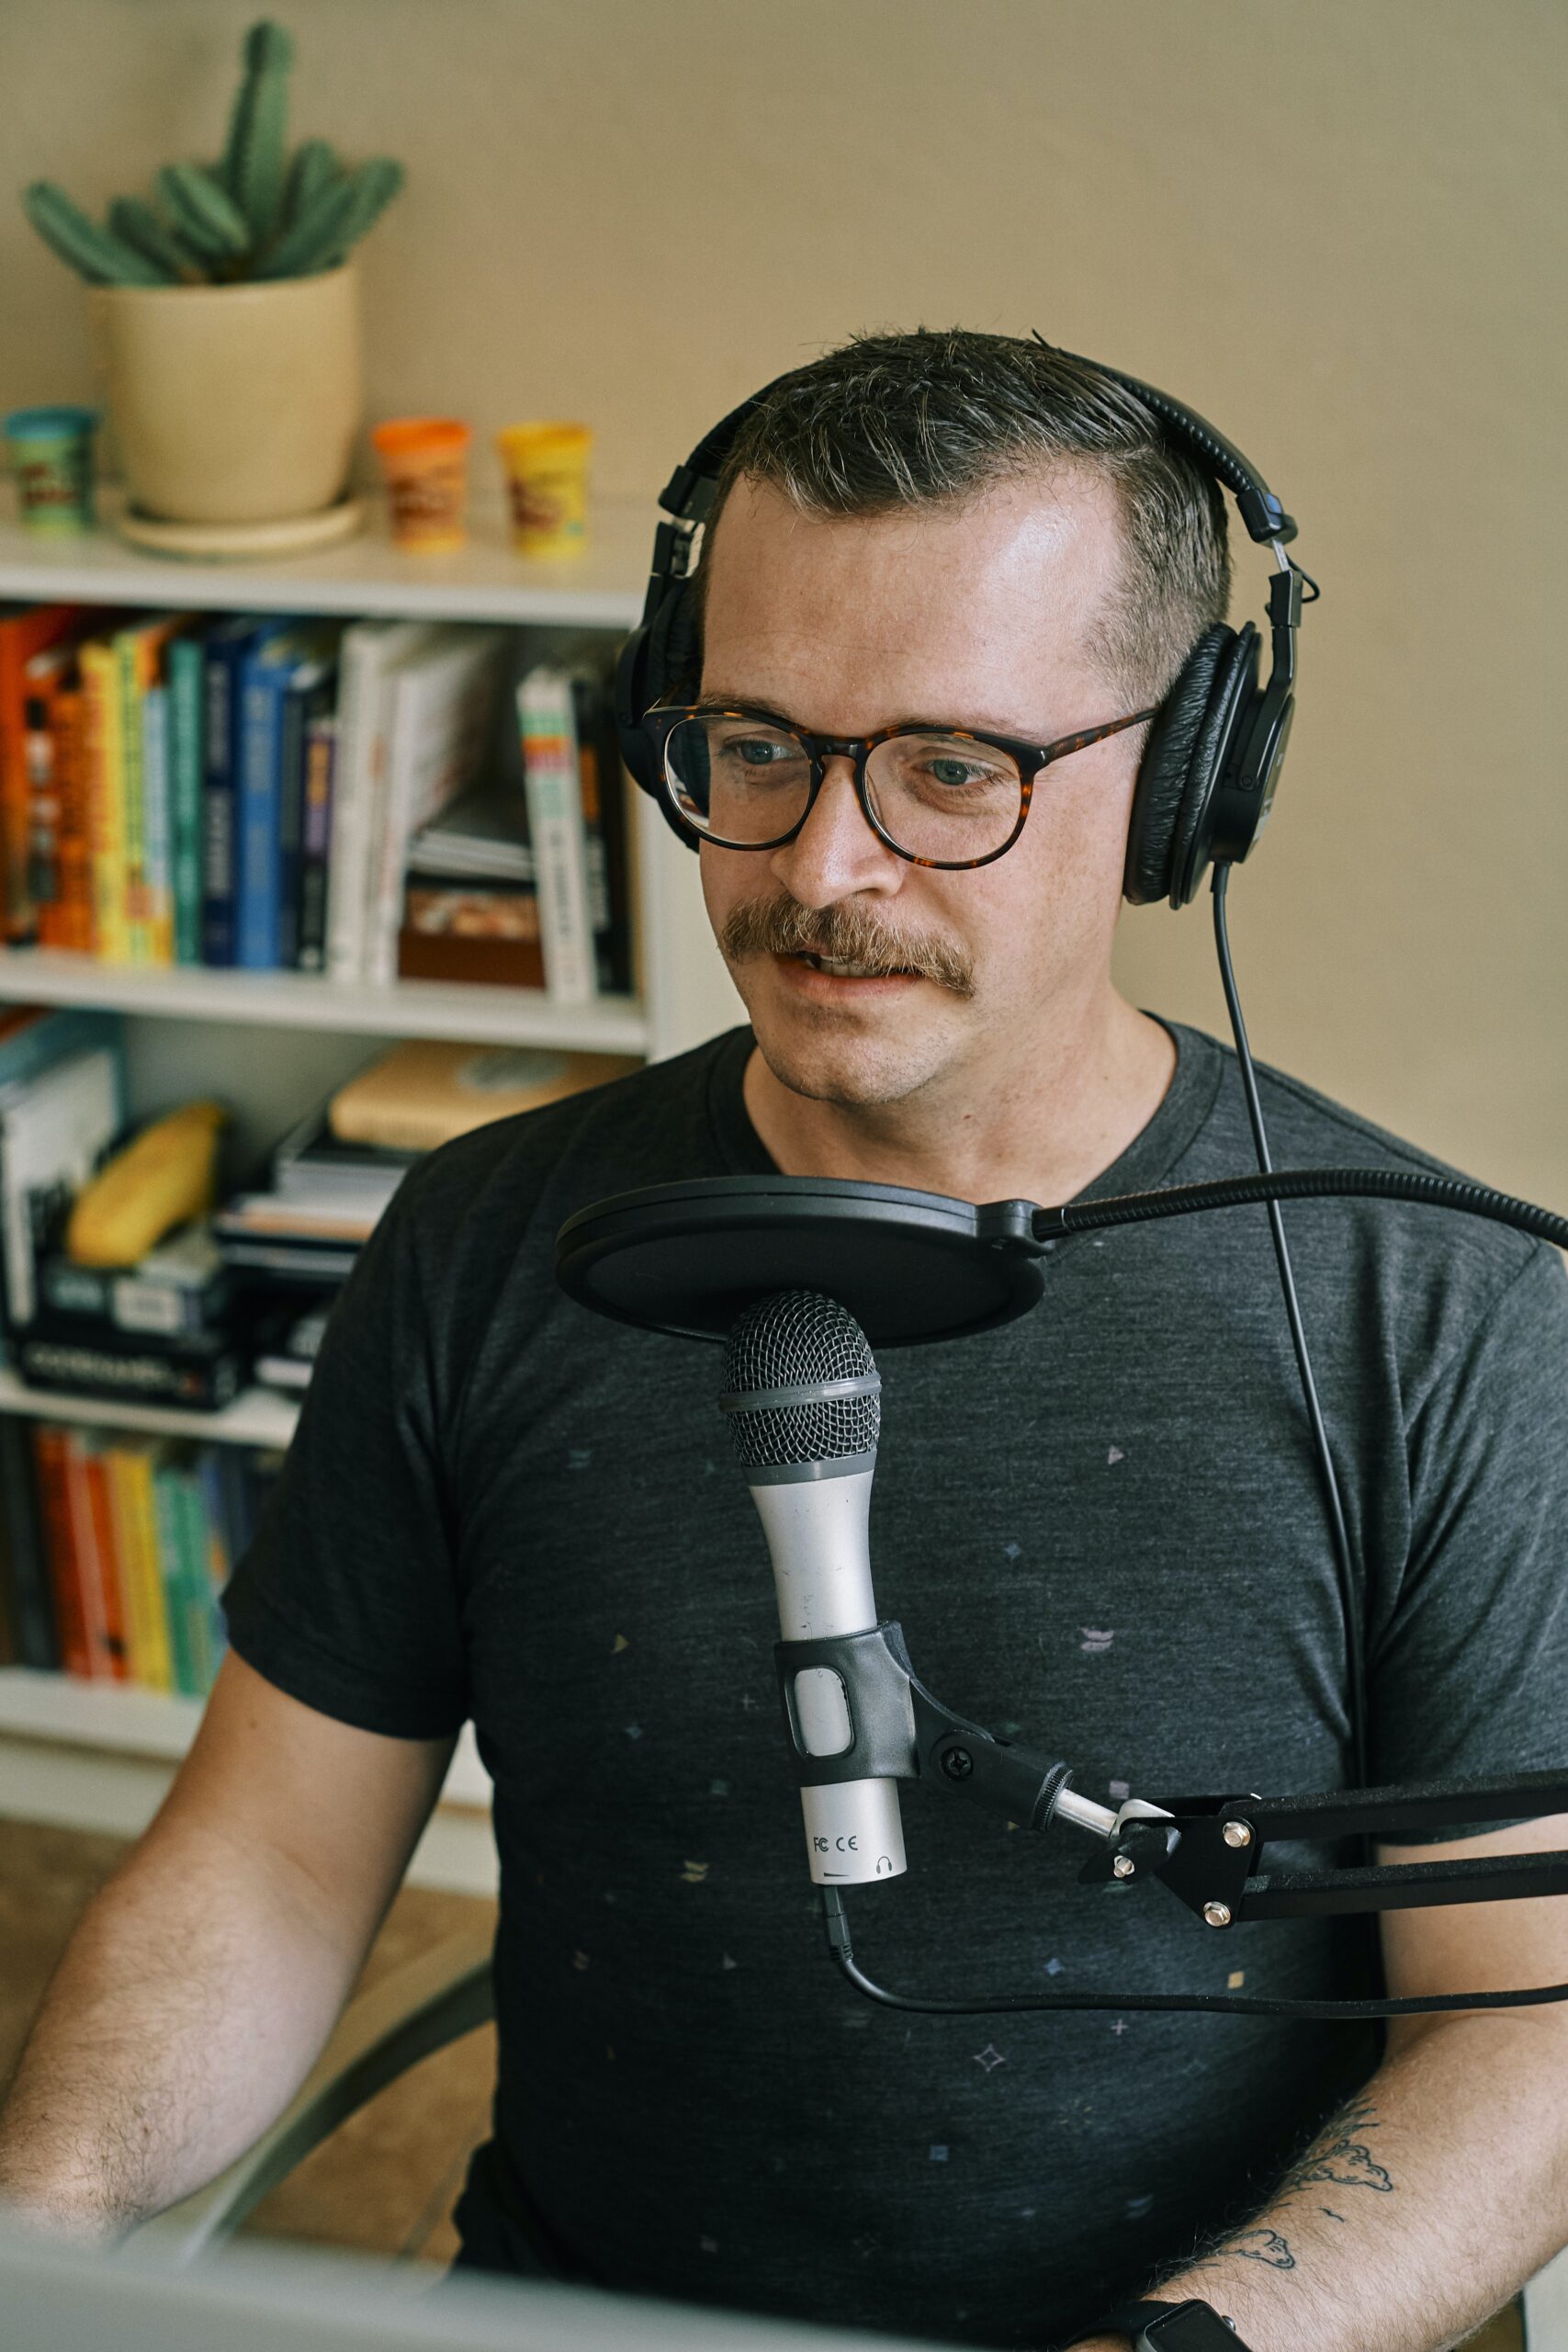 What Are The Best Practices For Podcast SEO And Discoverability?